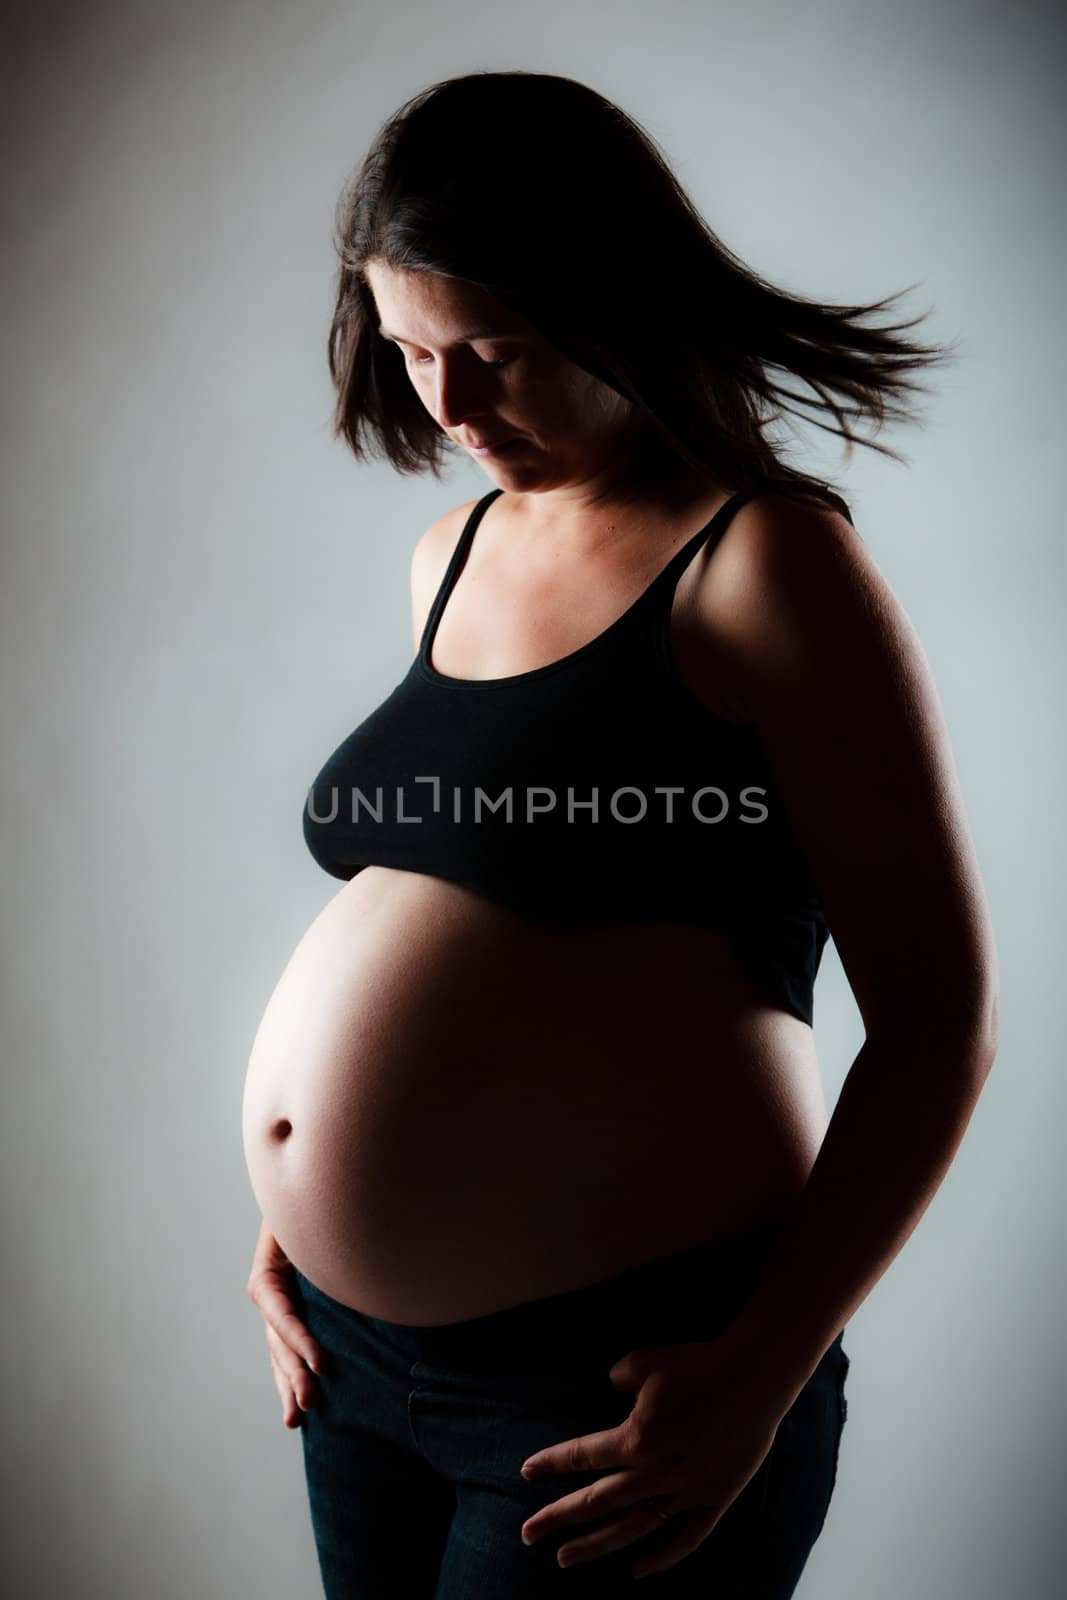 32 weeks pregnant woman by Talanis